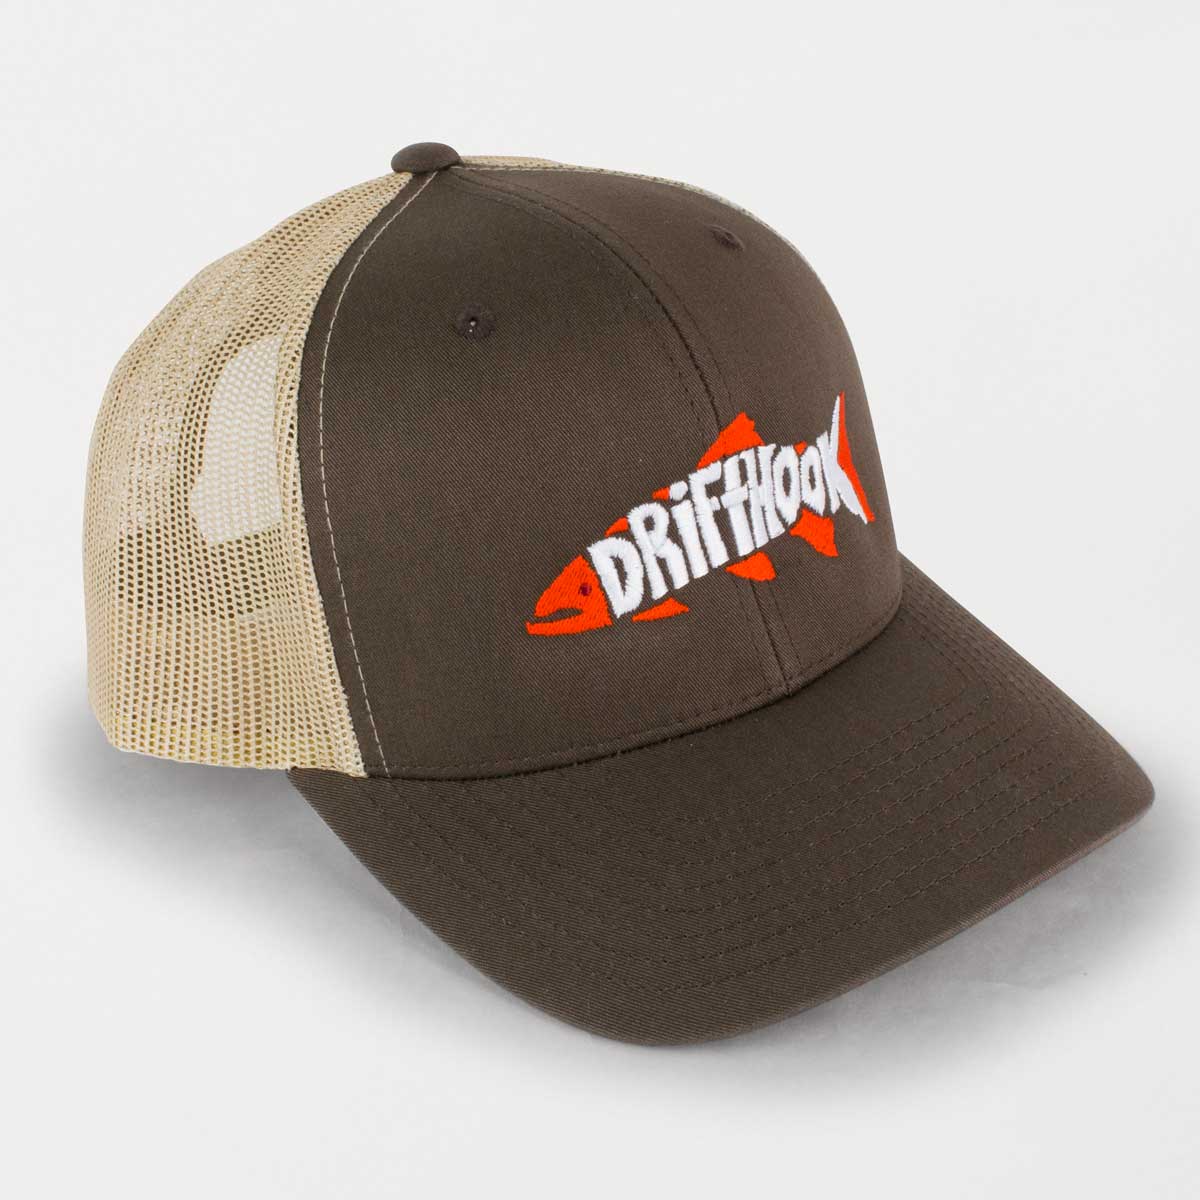 Fly Fishing Hats, T-Shirts, Tanks, Gaiters - Best for Keeping You Cool